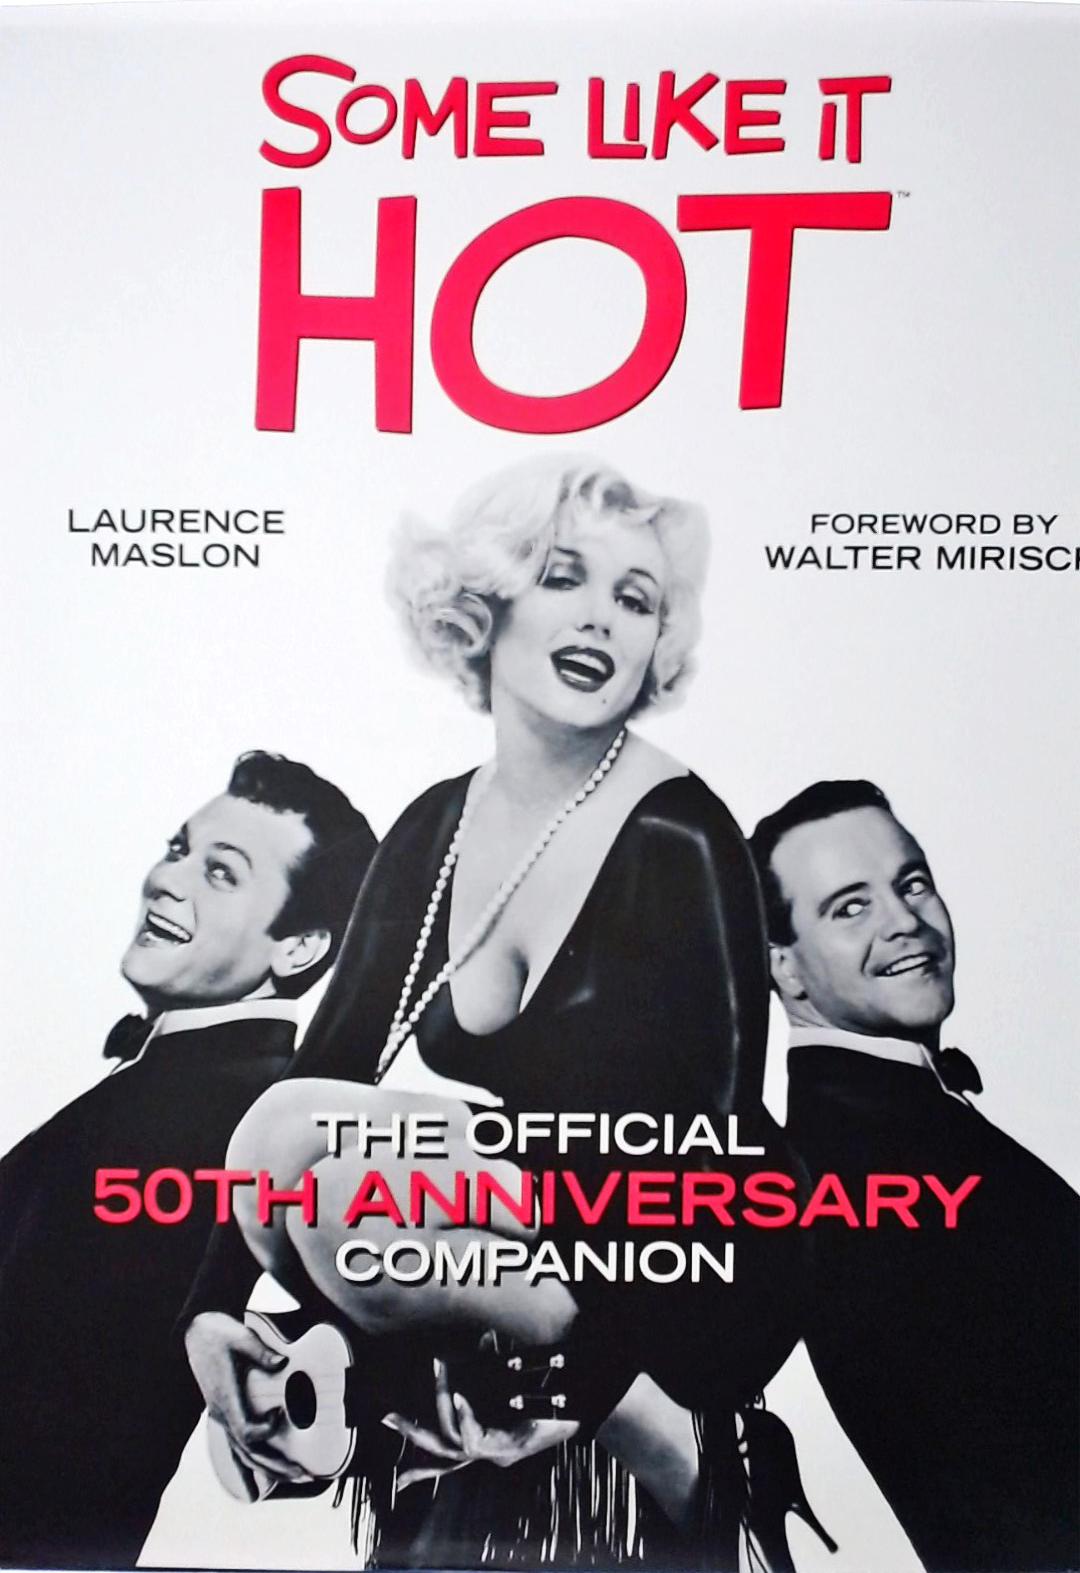 Some Like It Hot - The Official 50th Anniversary Companion